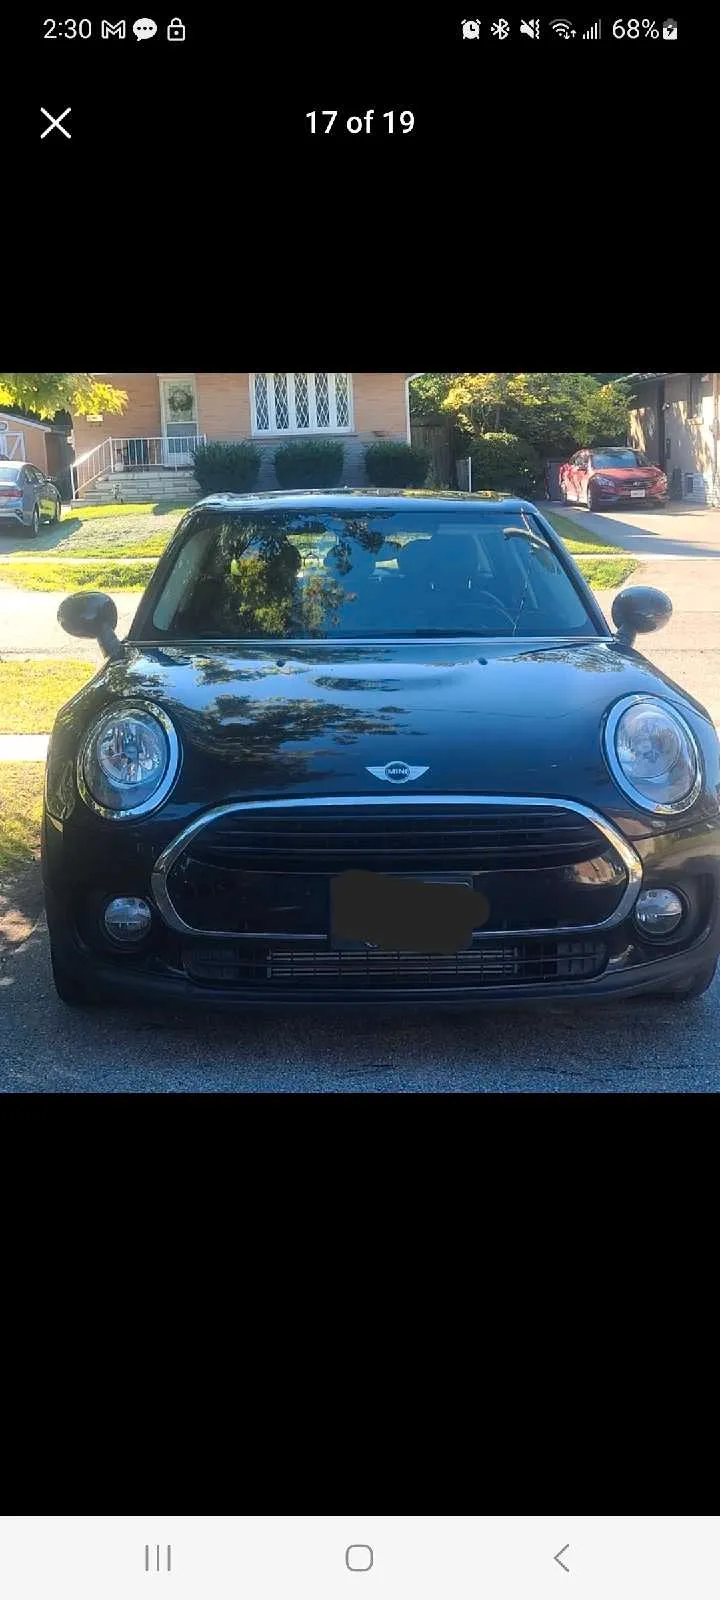 MINI Clubman - Great Condition - LOWEST Price